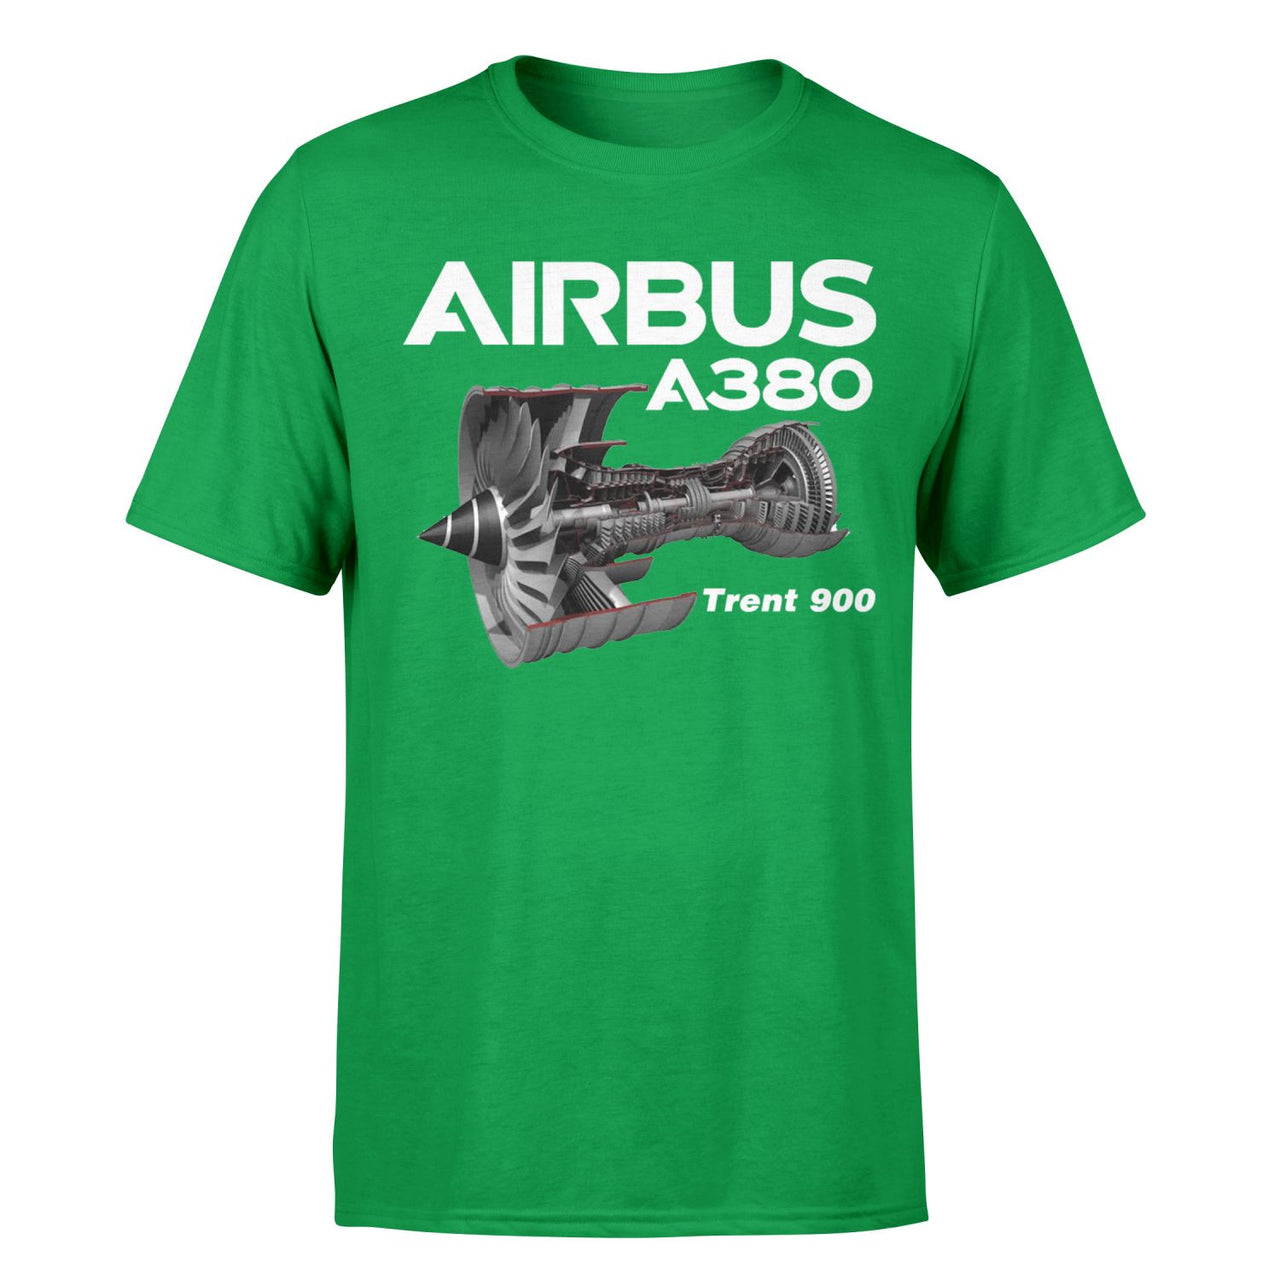 Airbus A380 & Trent 900 Engine Designed T-Shirts